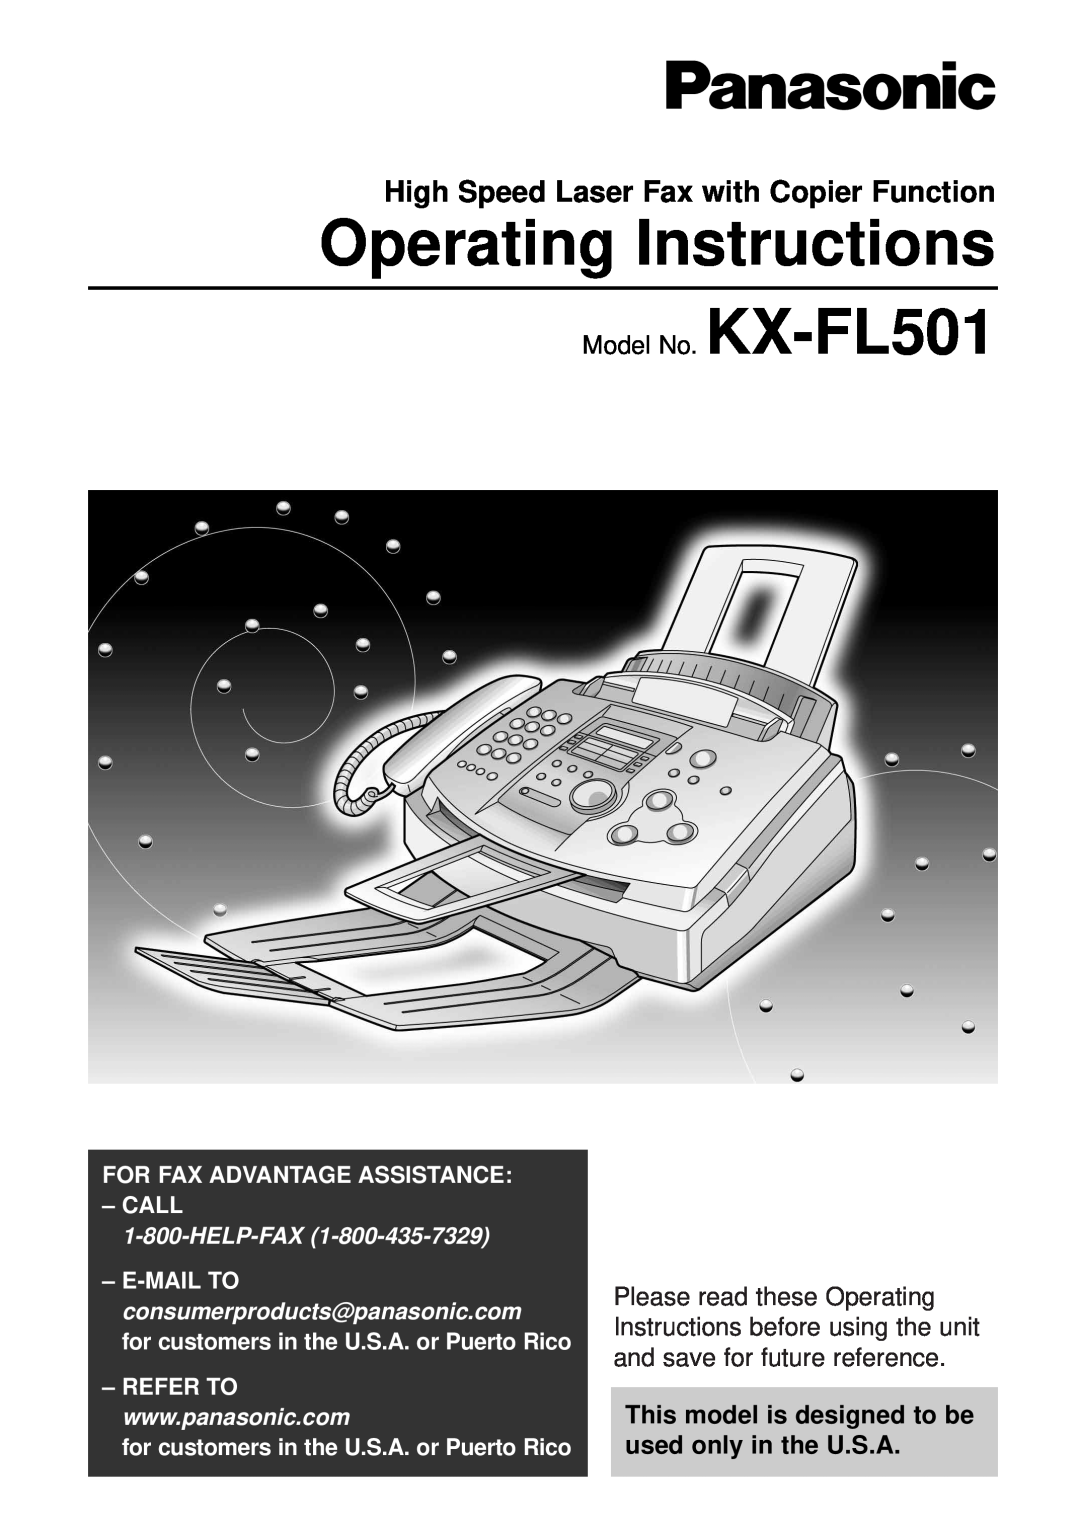 Panasonic manual High Speed Laser Fax with Copier Function, Model No. KX-FL501, Operating Instructions 